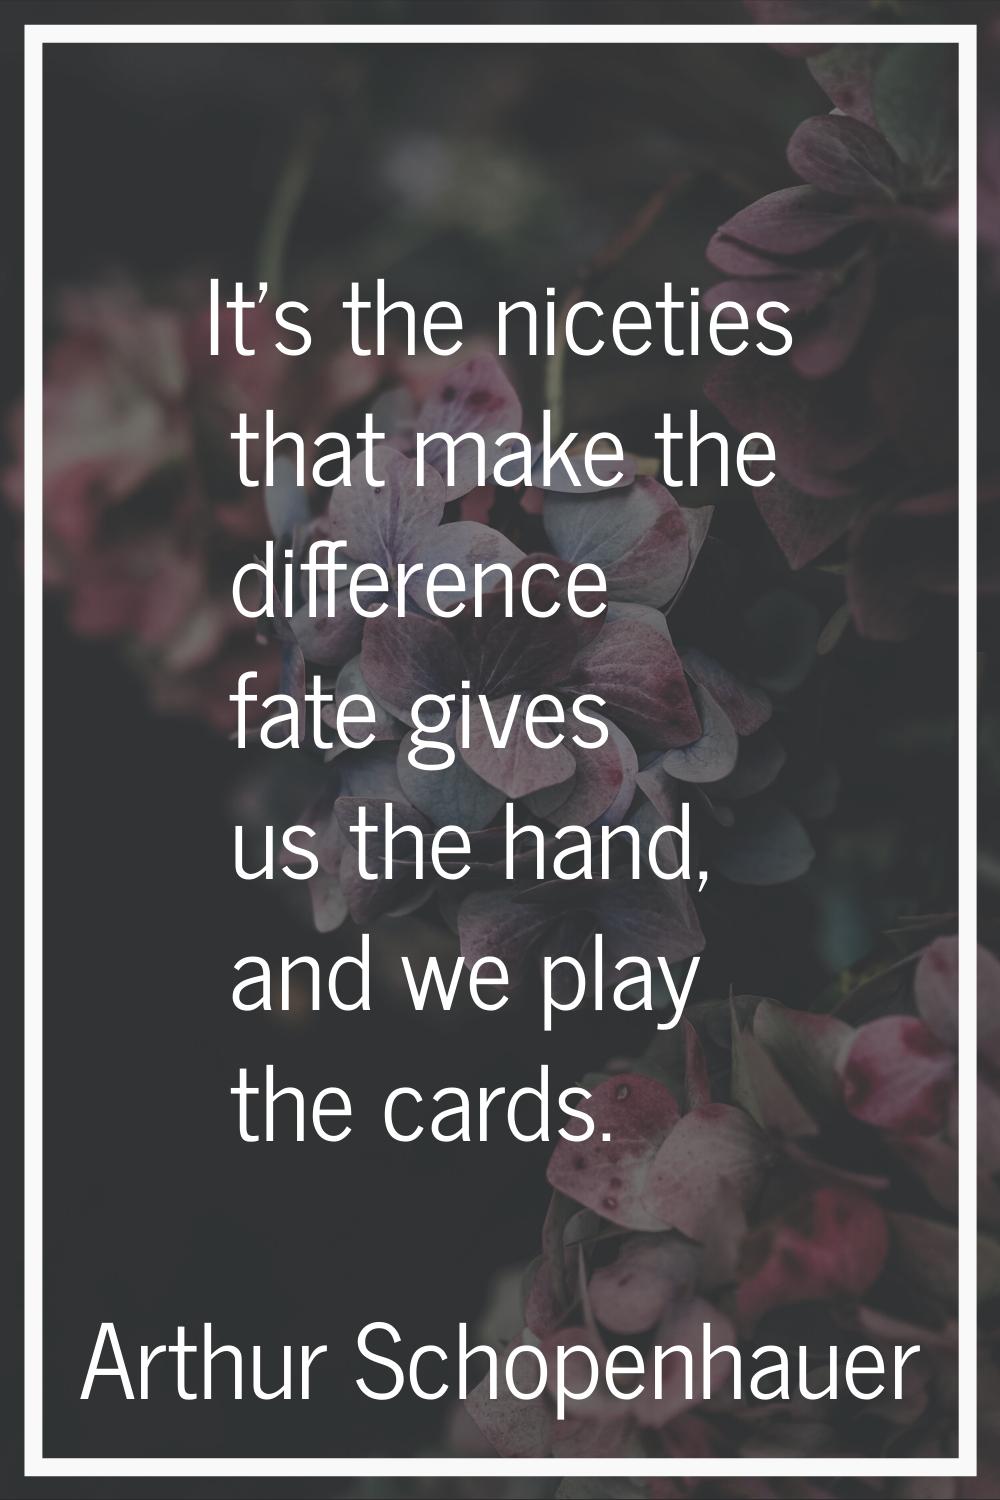 It's the niceties that make the difference fate gives us the hand, and we play the cards.